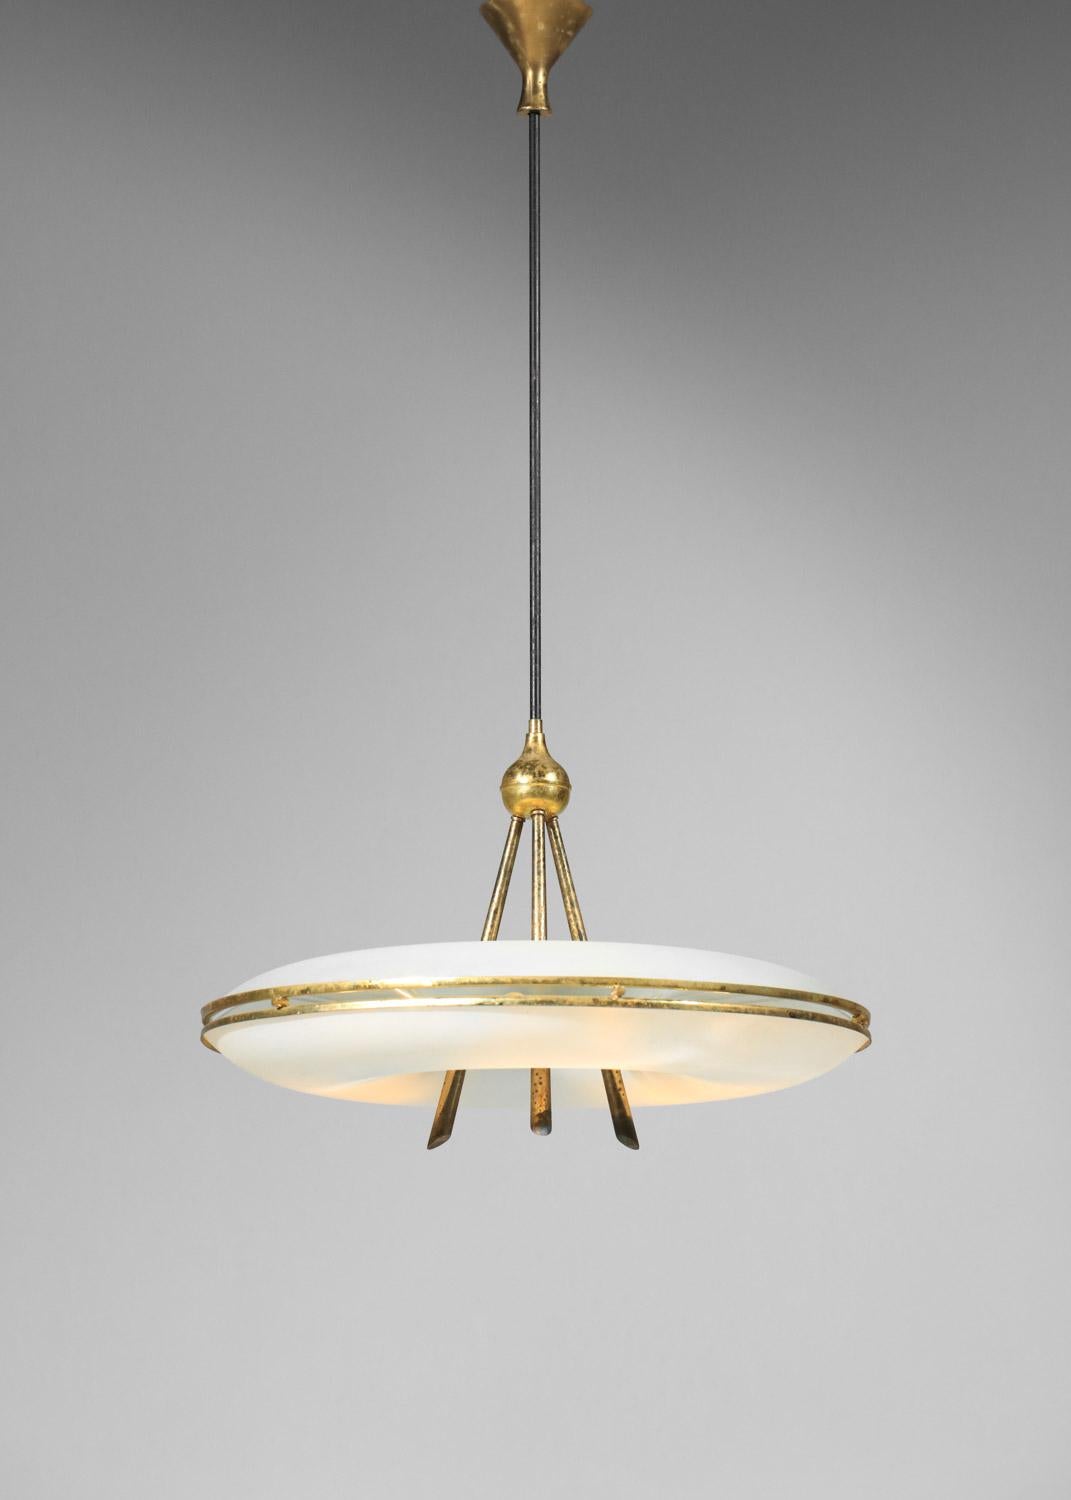 Italian suspension chandelier attributed to Pietro Chiesa glass and brass  7